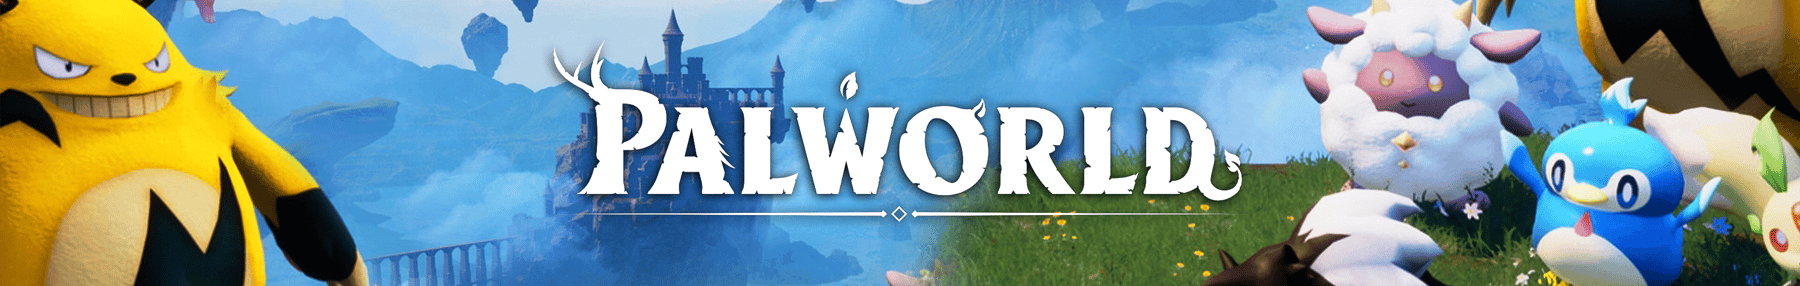 Palworld Guides Banner